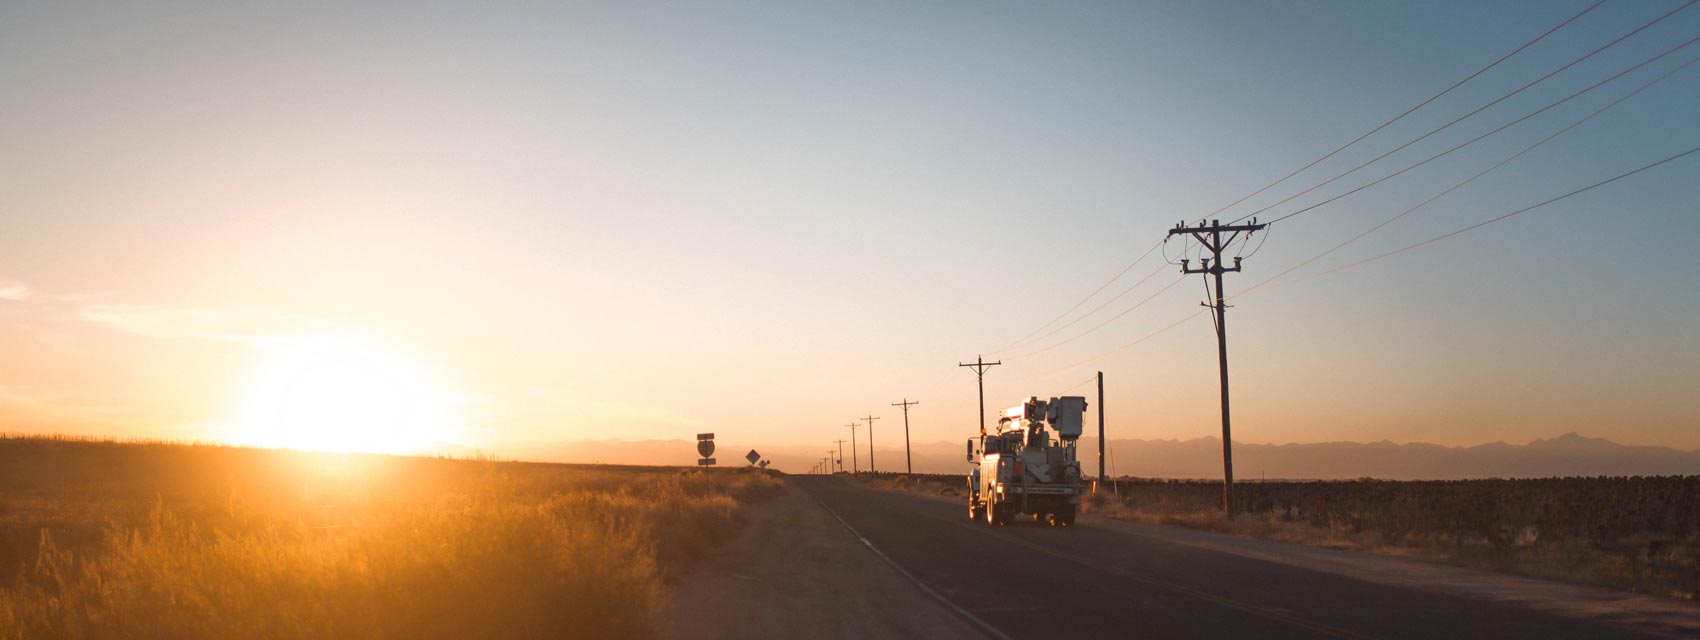 Truck driving down road in sunrise